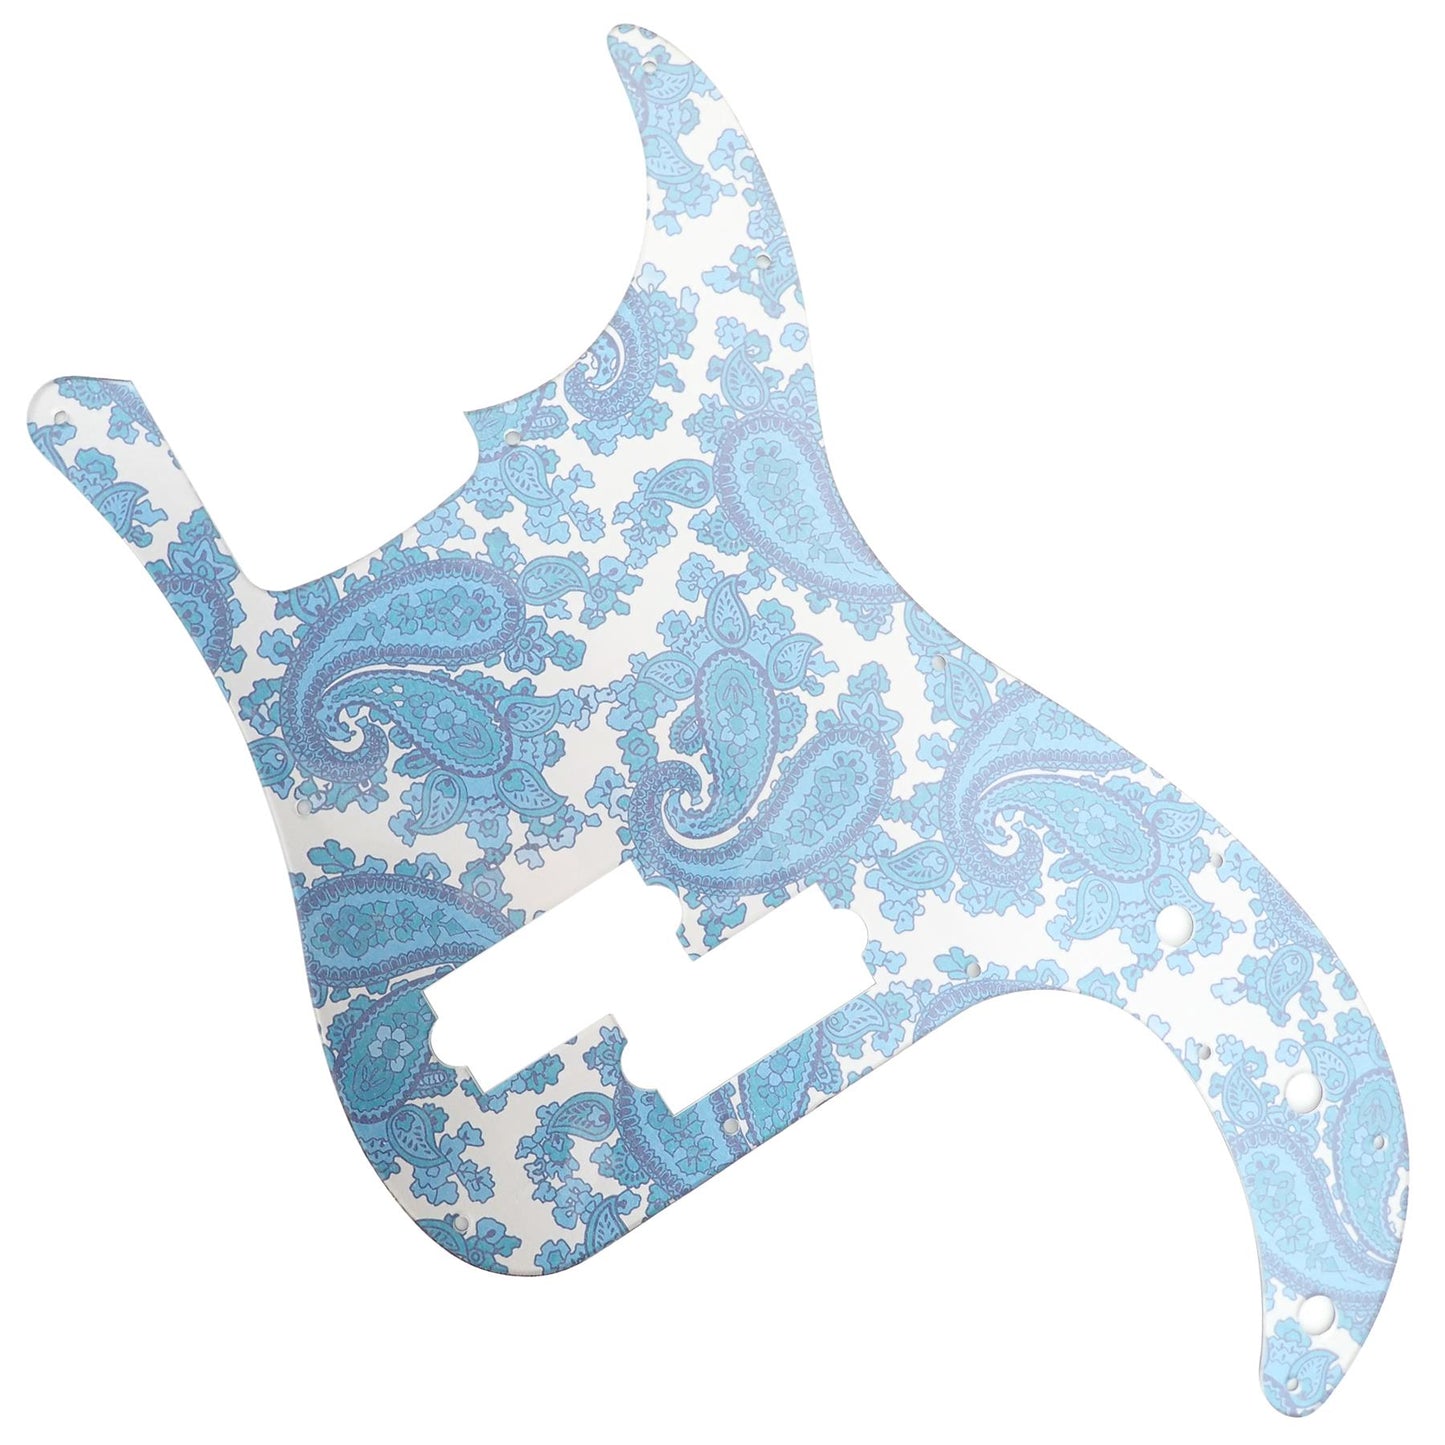 Luthitec Silver Backed Blue, Silver Backing Paisley Acrylic Precision Bass Guitar Pickguard